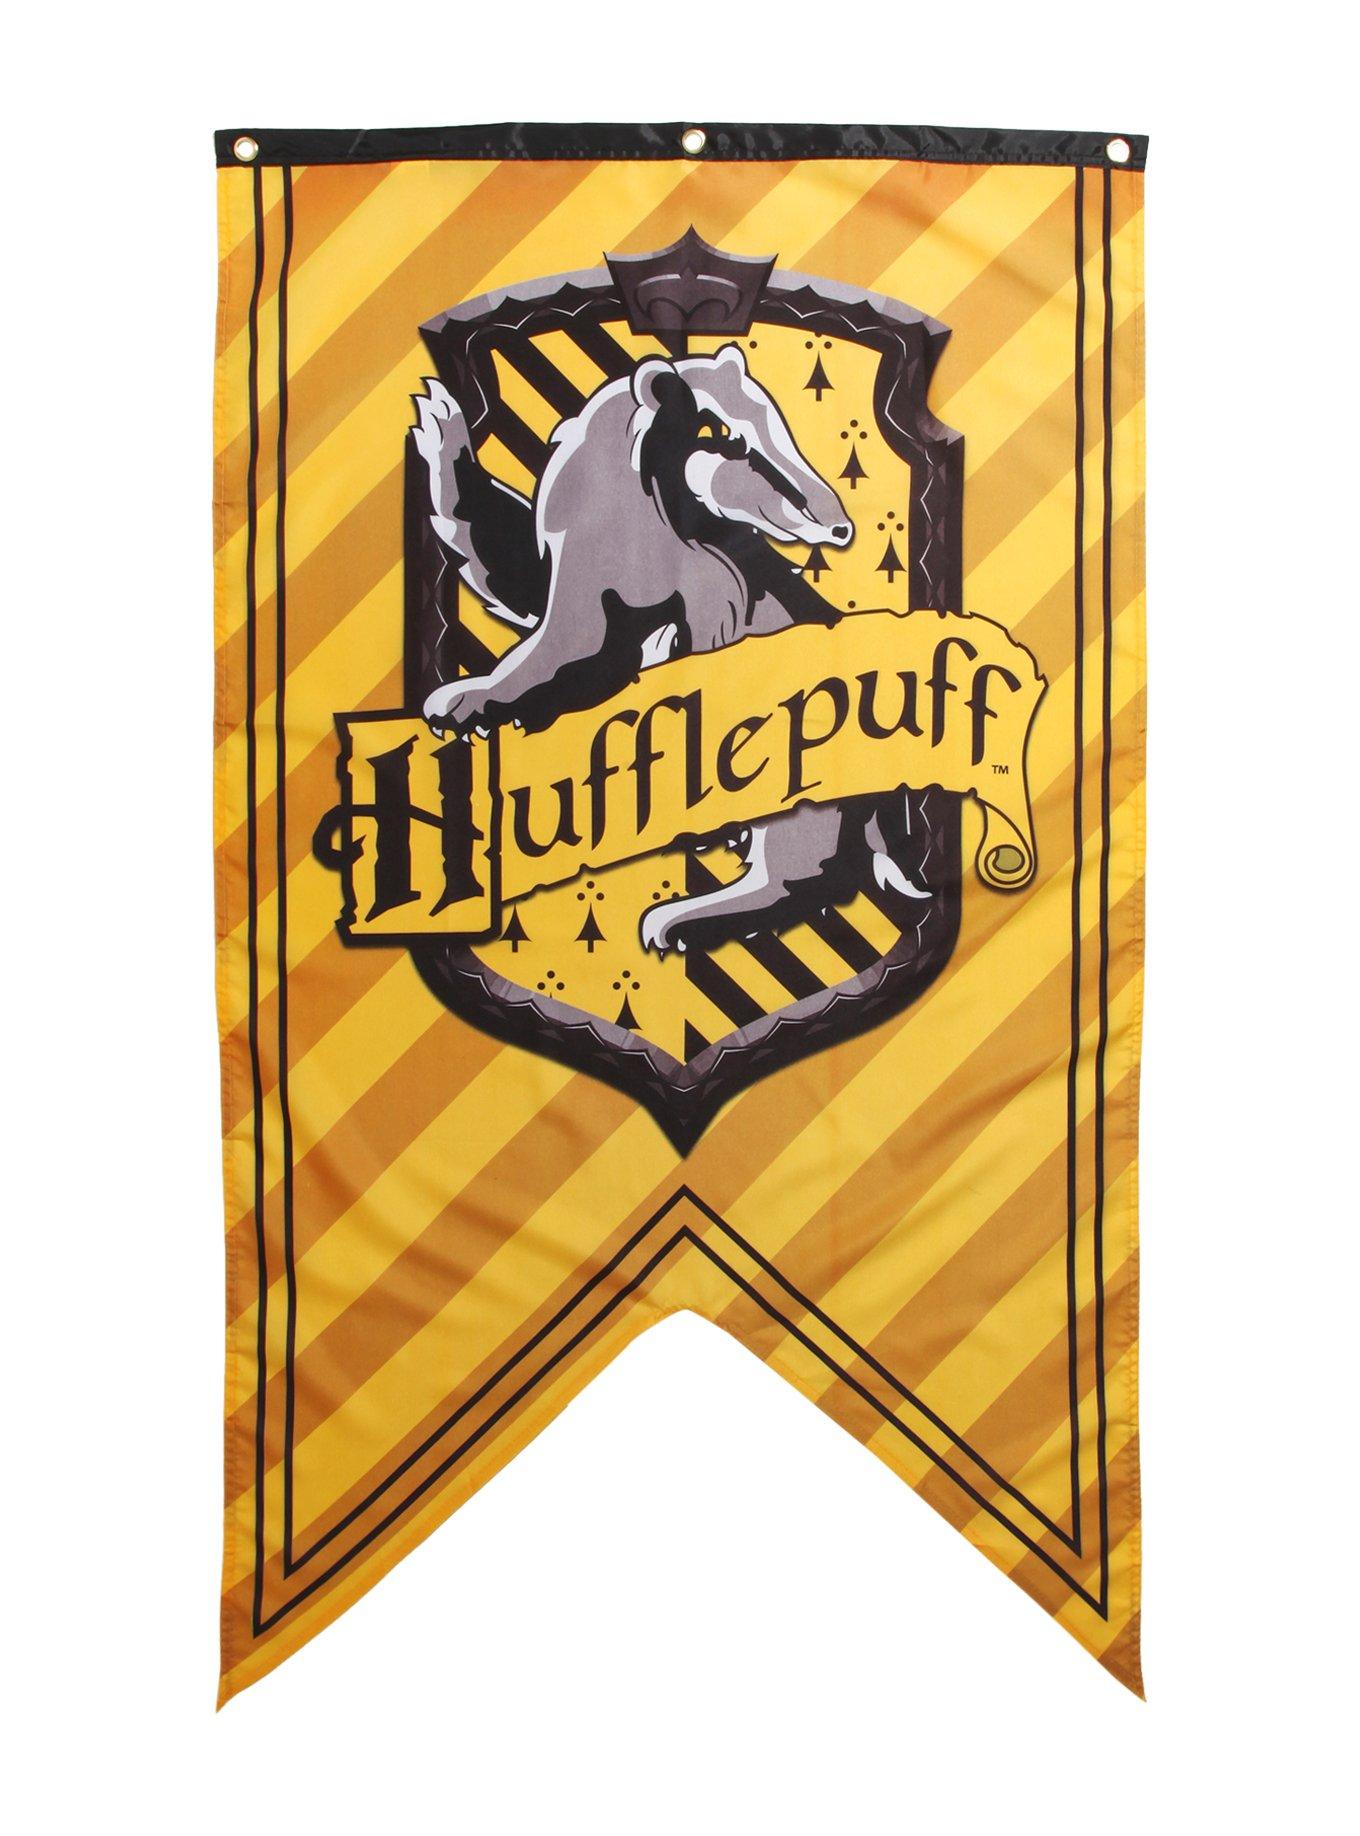 Harry Potter Hufflepuff Shield Banner Hot Topic Exclusive | Hot Topic